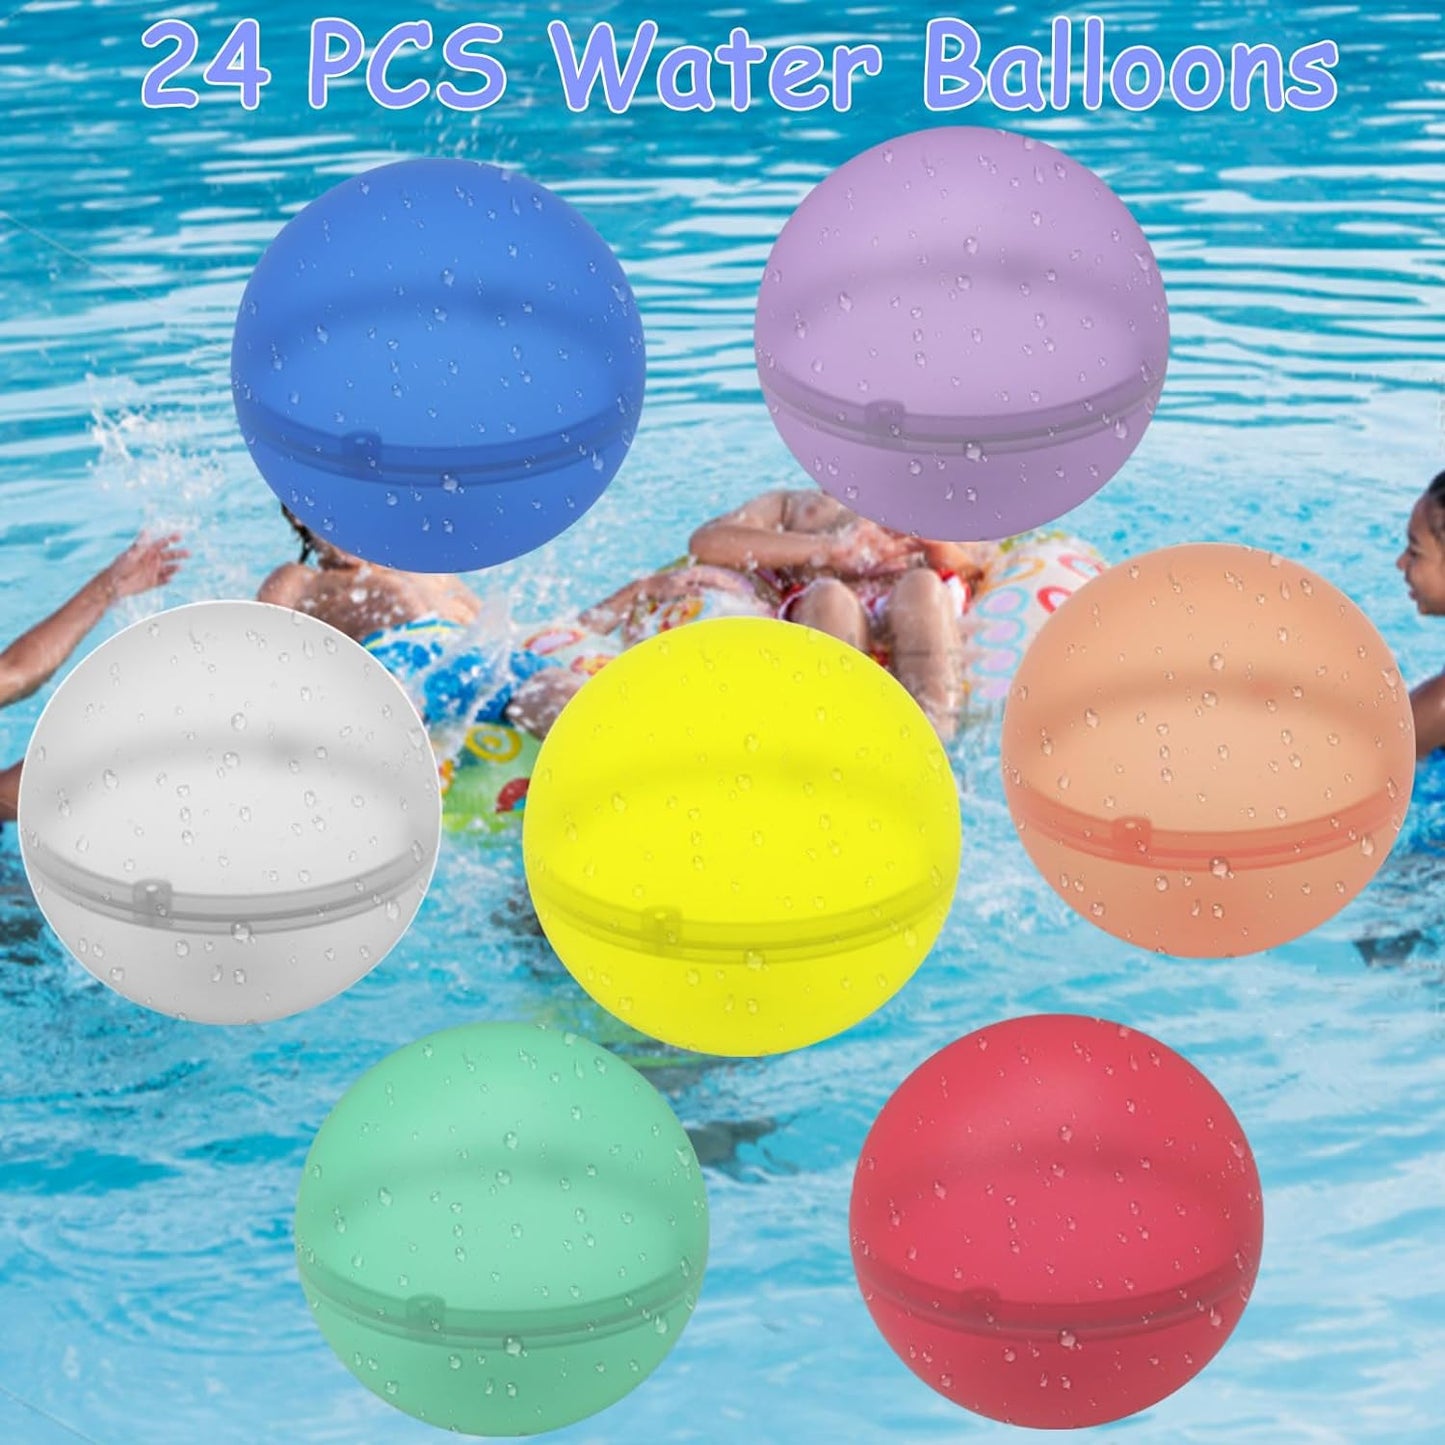 24 Pcs Water Balloons, Reusable Water Balloons,Water Balls for Kids, Soft Silicone Water Balloons Quick Fill, Kids Adults Water Games outside Summer Fun Party